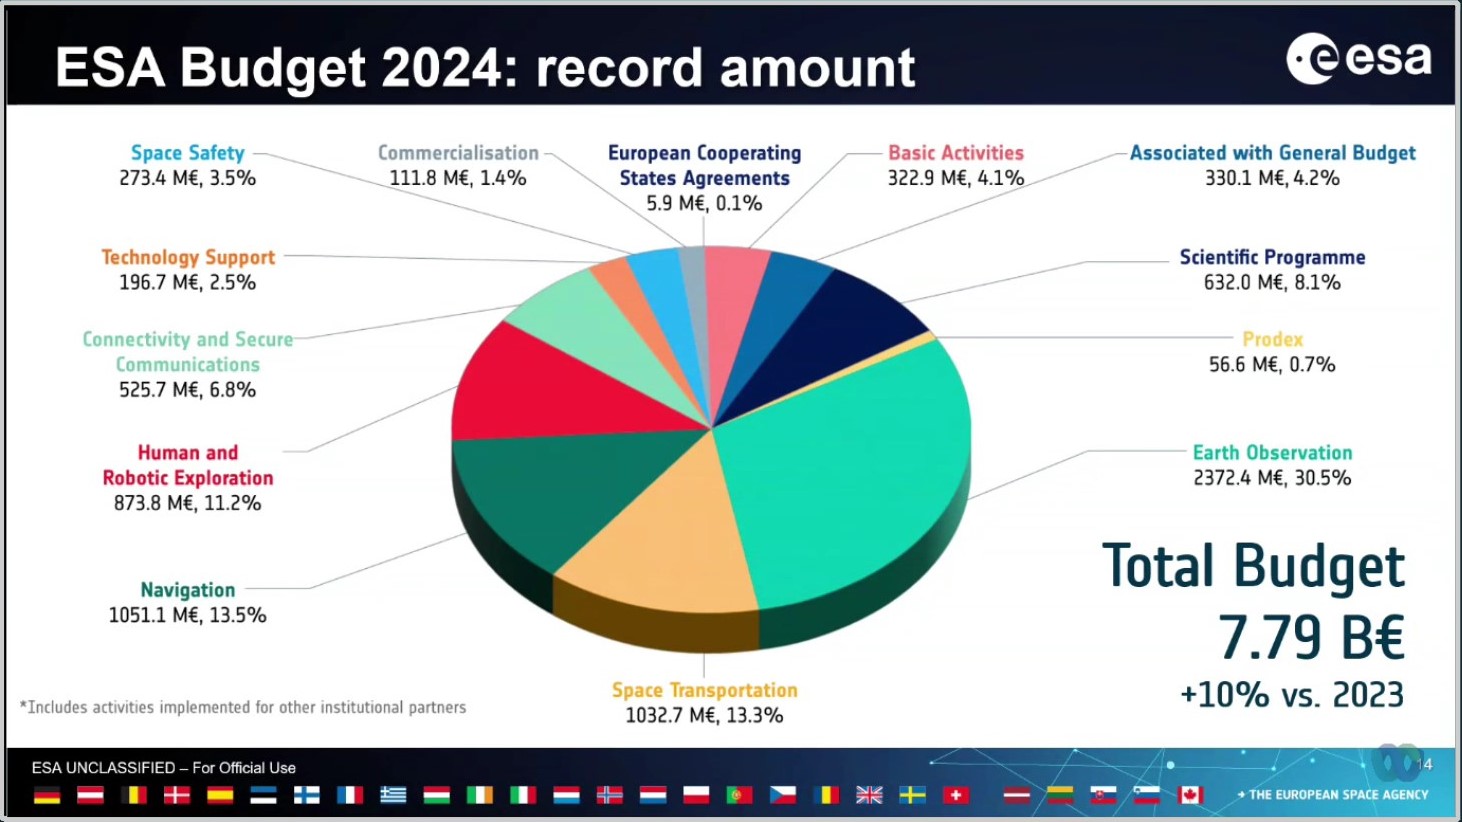 A pie chart showing ESA's budget for 2024